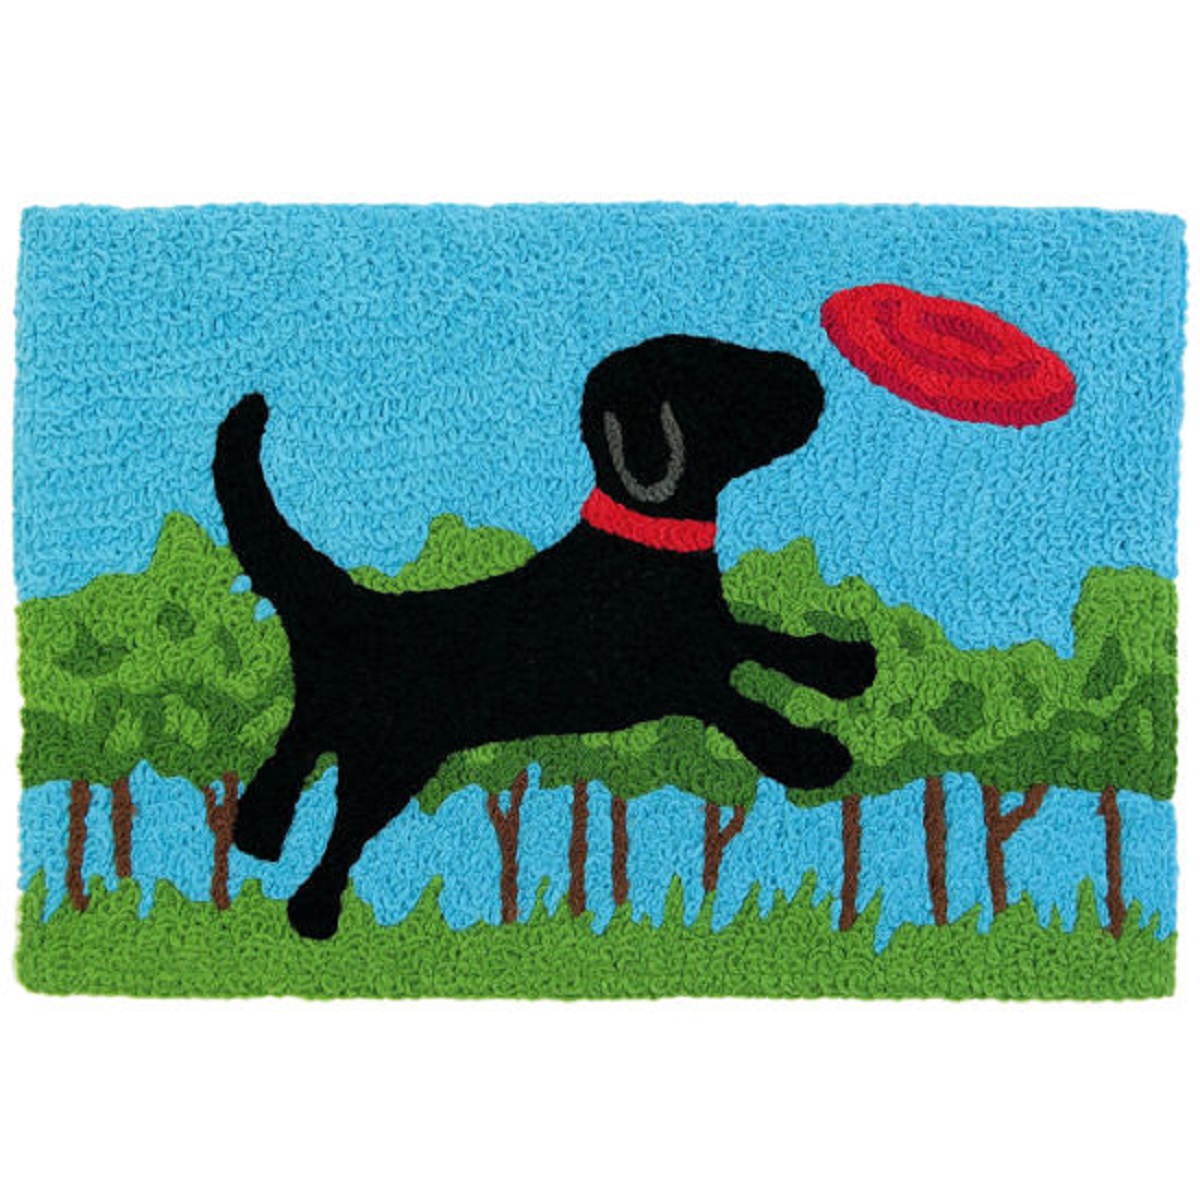 Jellybean Frisbee Fido Family Dog Playing Catch  30 X 20 Inch Area Accent Washable Rug